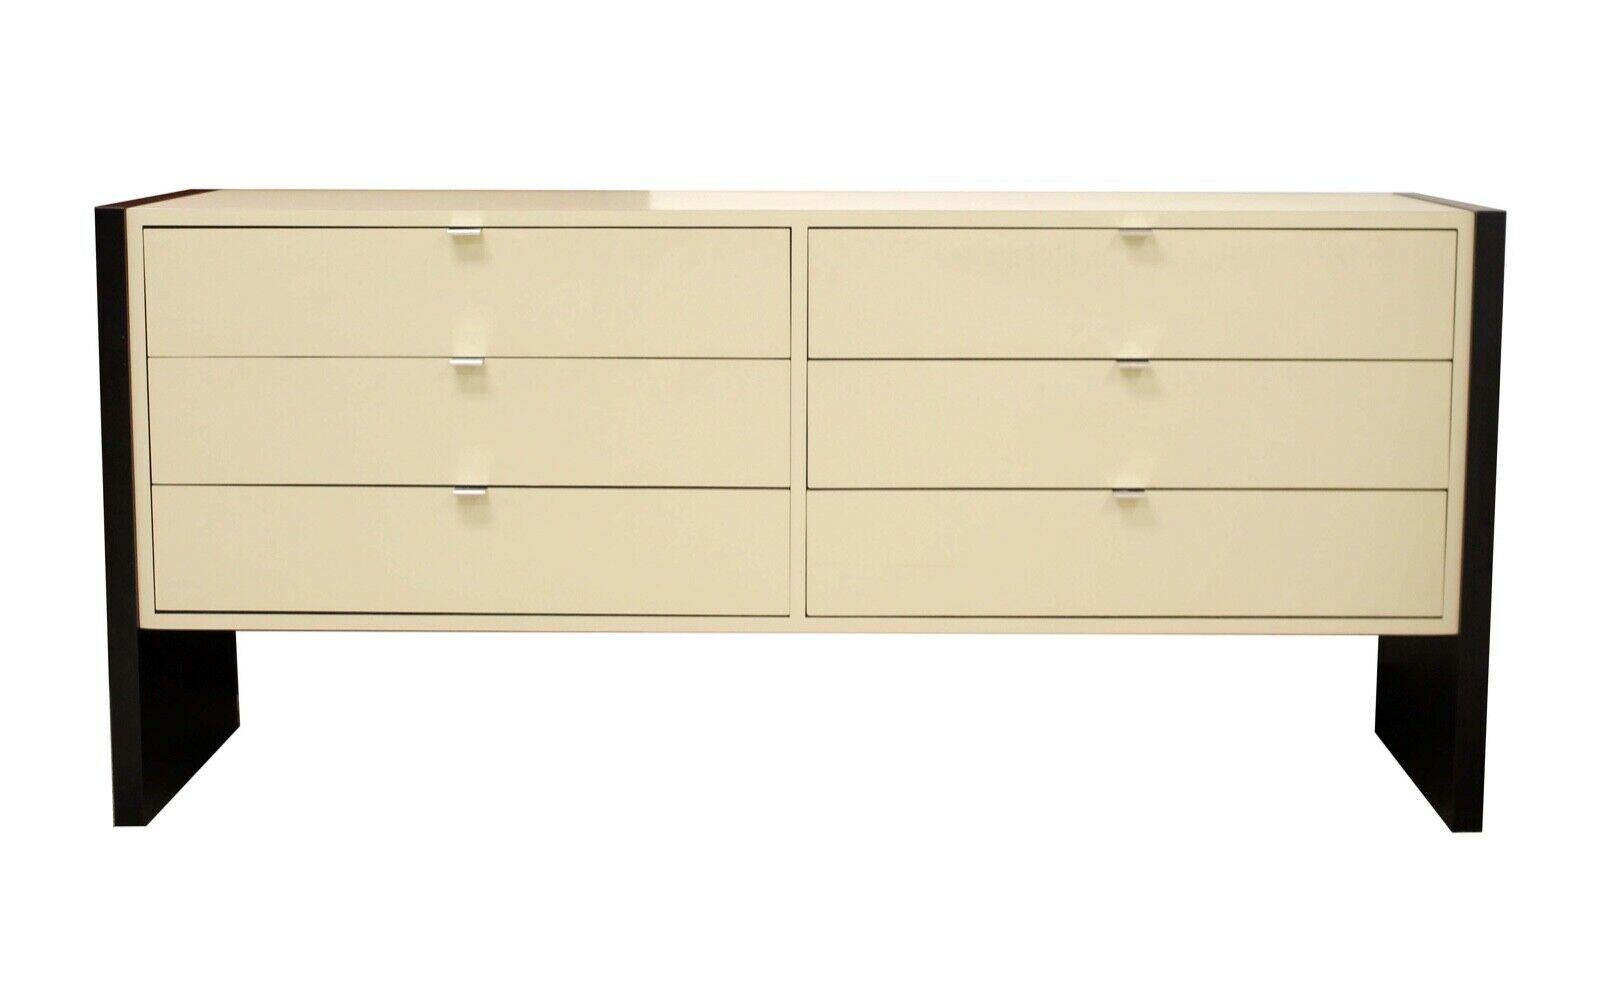 This Memphis Style dresser and pair of nightstands is detailed with white laminated drawers and black sides. The night stands each include two drawers with silver hardware while the matching dresser includes 6 large size drawers. Modern and